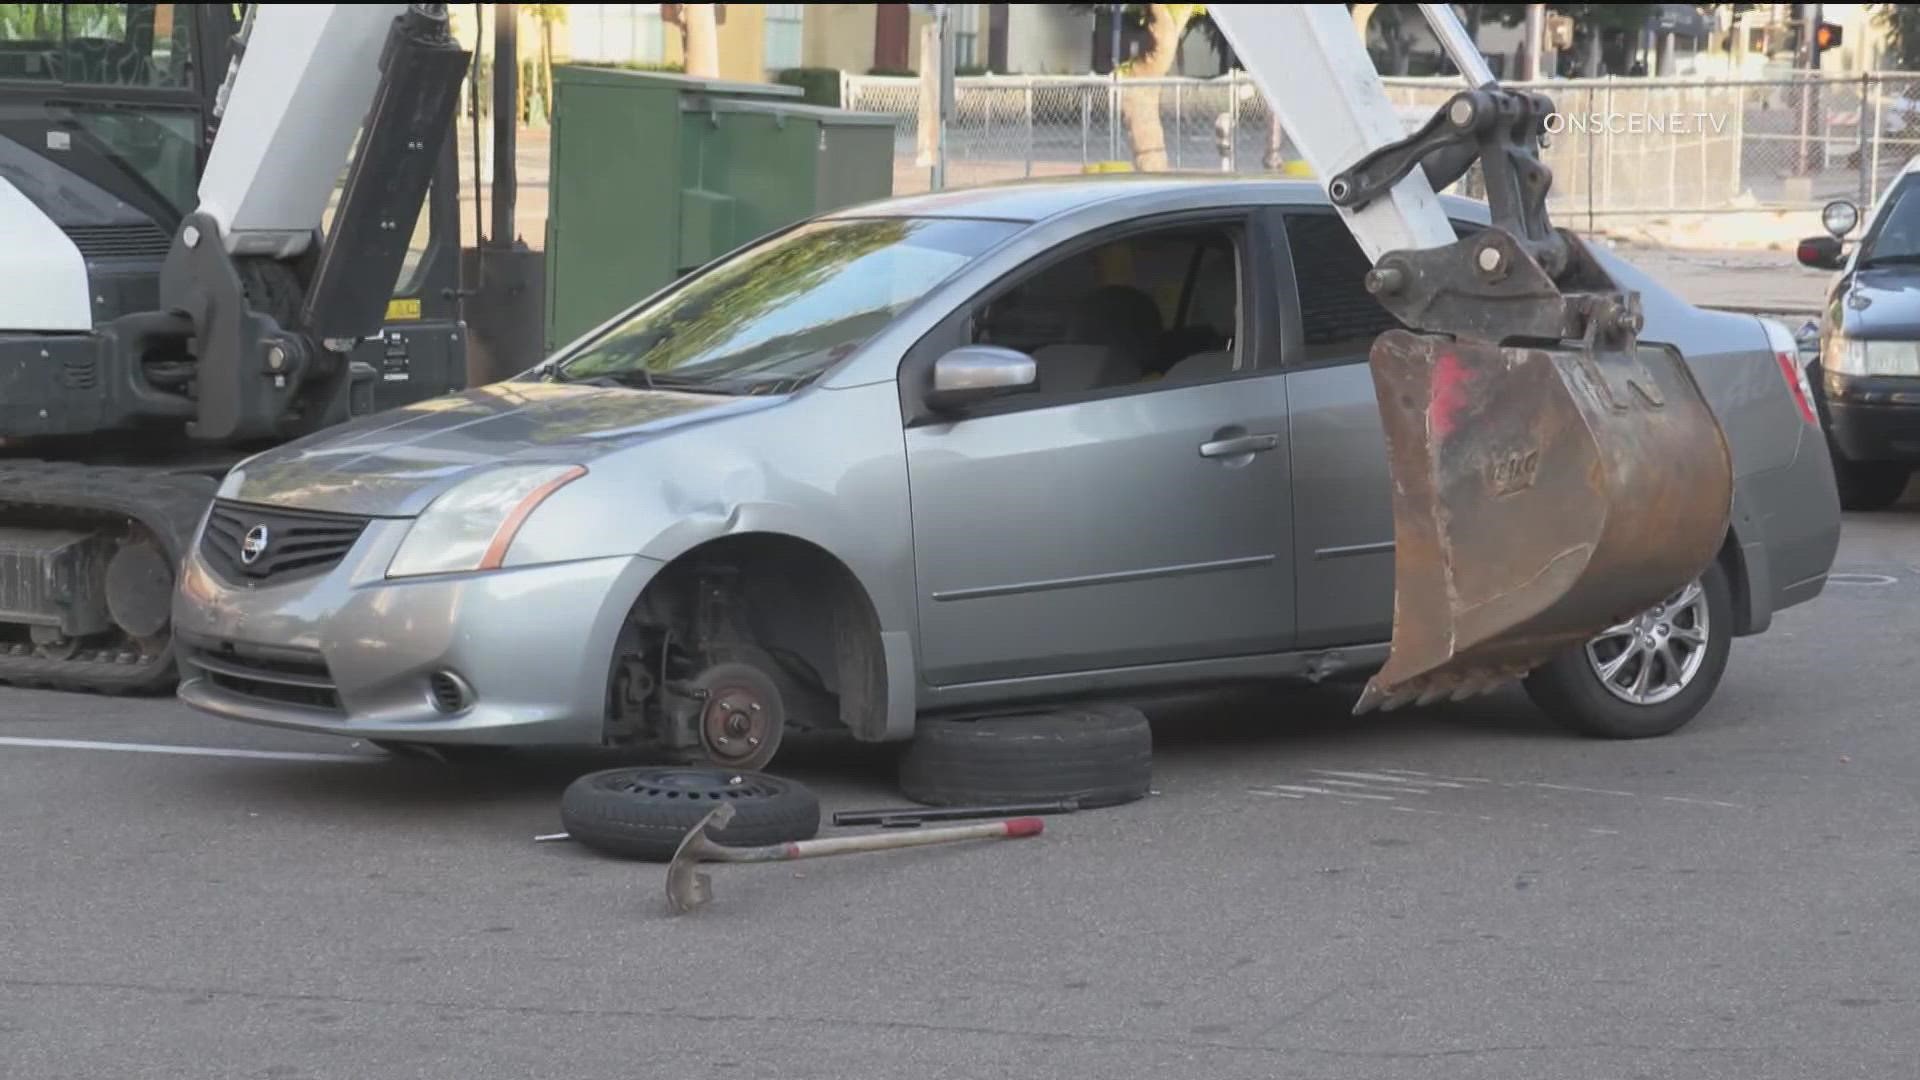 "I was helping somebody," the suspect said. A homeless man was arrested for stealing an excavator in Downtown San Diego to help someone change their tire.